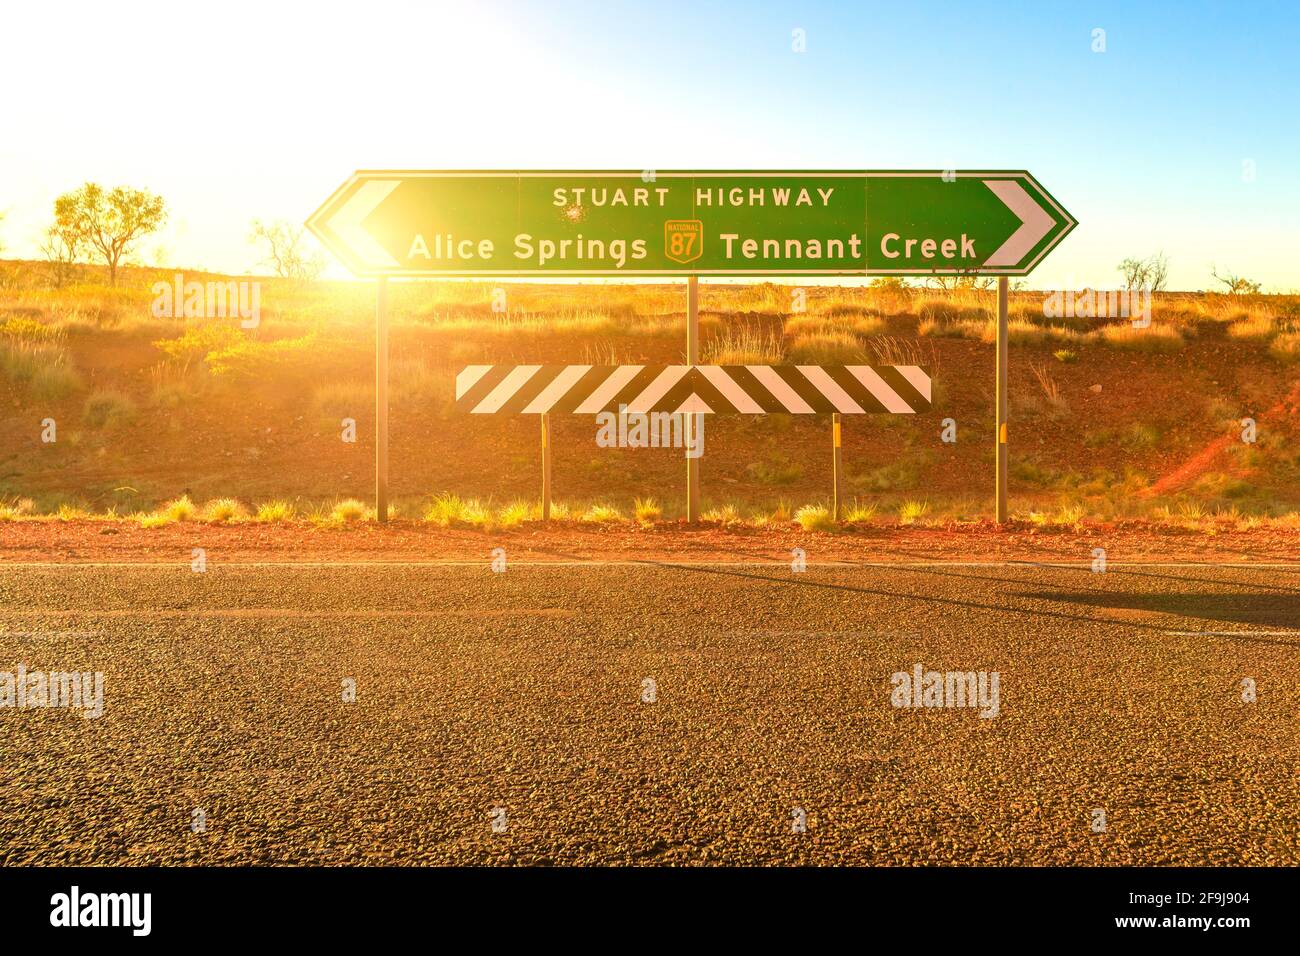 Northern Territory, Australia Outback. Stuart Highway signboard direction Alice Springs or Tennant Creek. Tourism in Central Australia, Red Centre Stock Photo